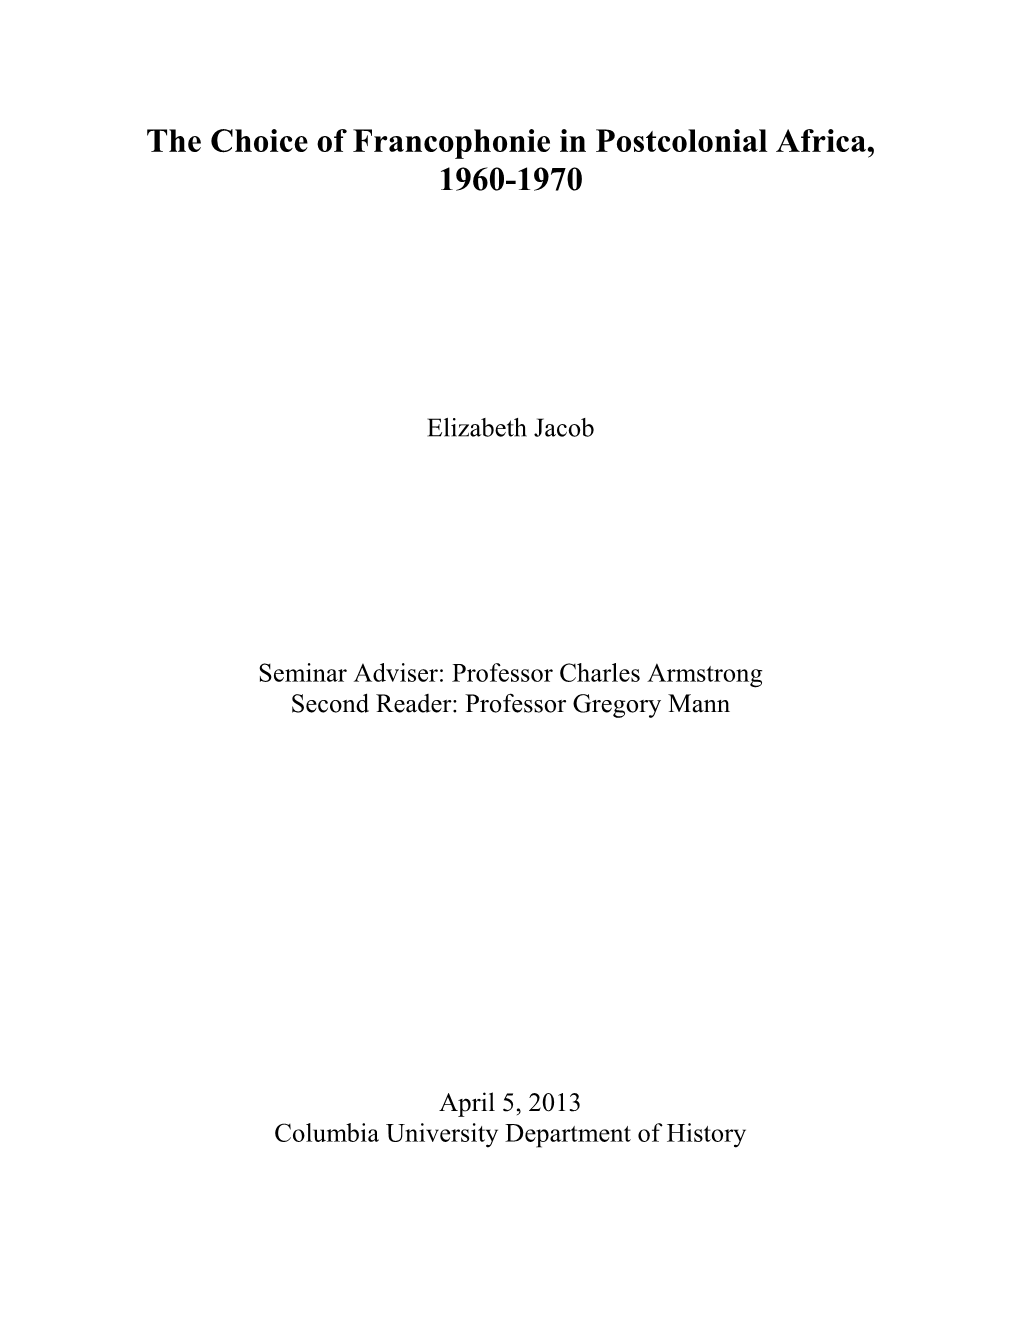 The Choice of Francophonie in Postcolonial Africa, 1960-1970